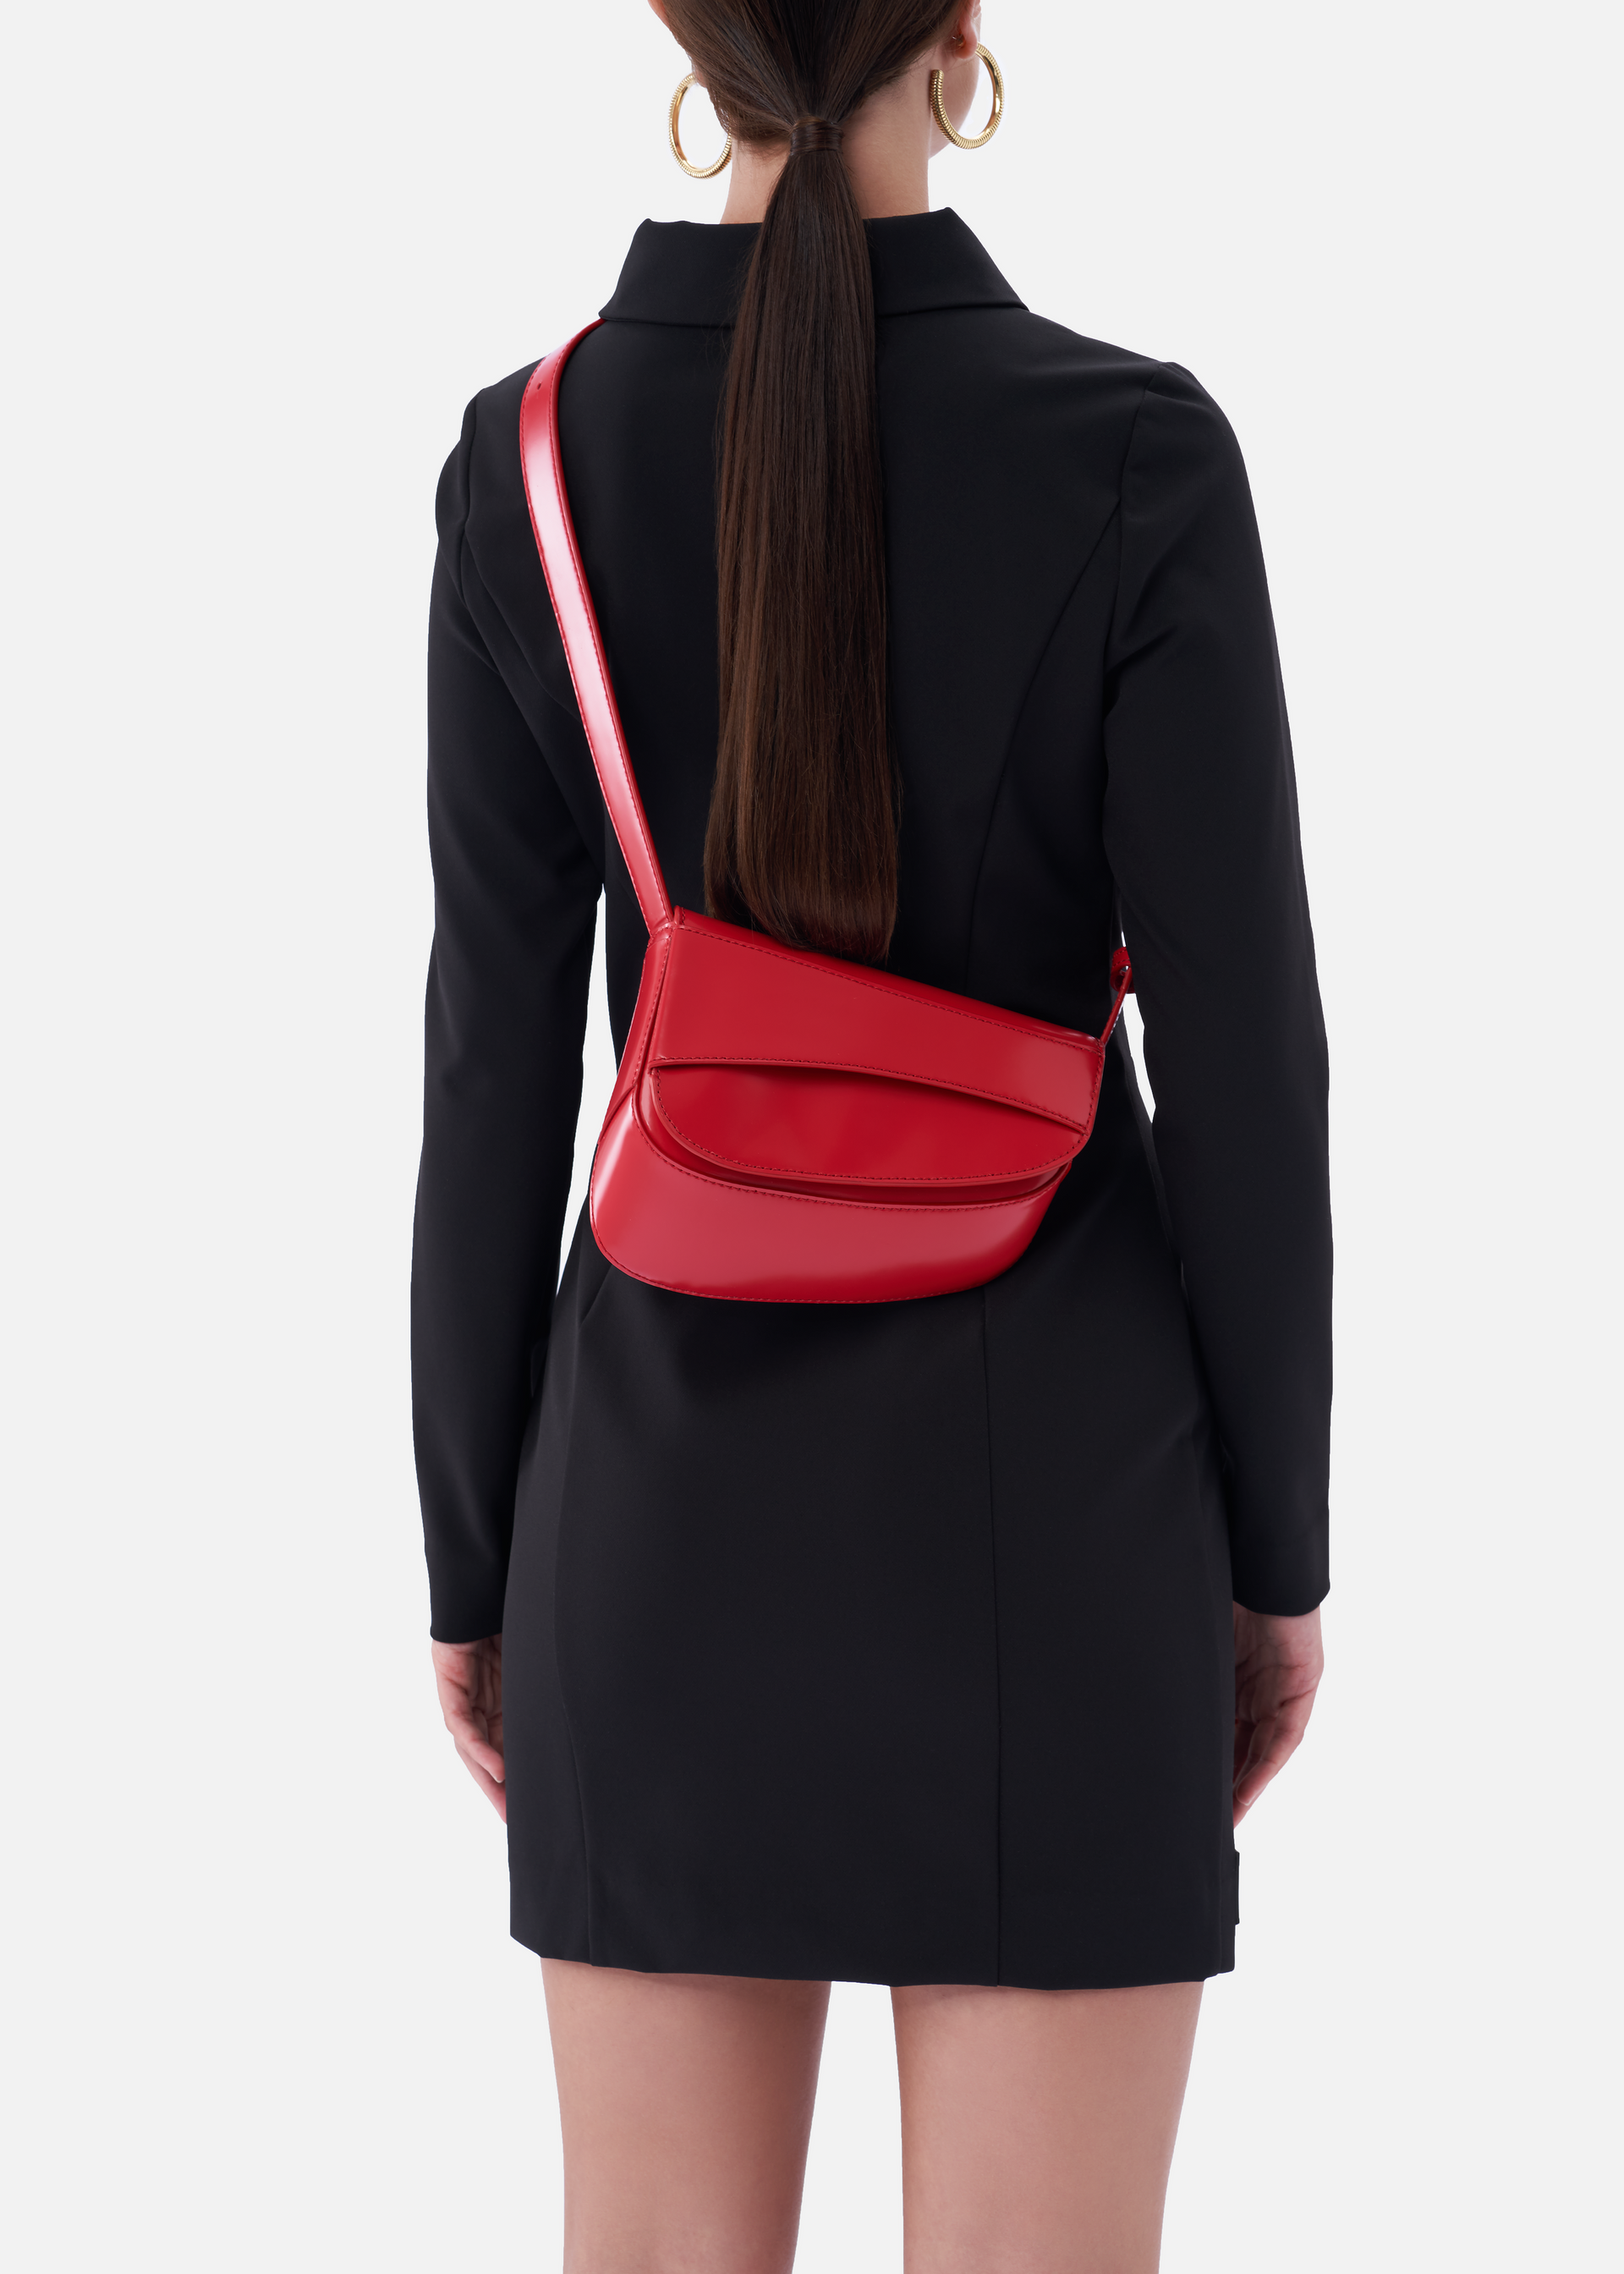 Marianne small patent leather shoulder bag in red